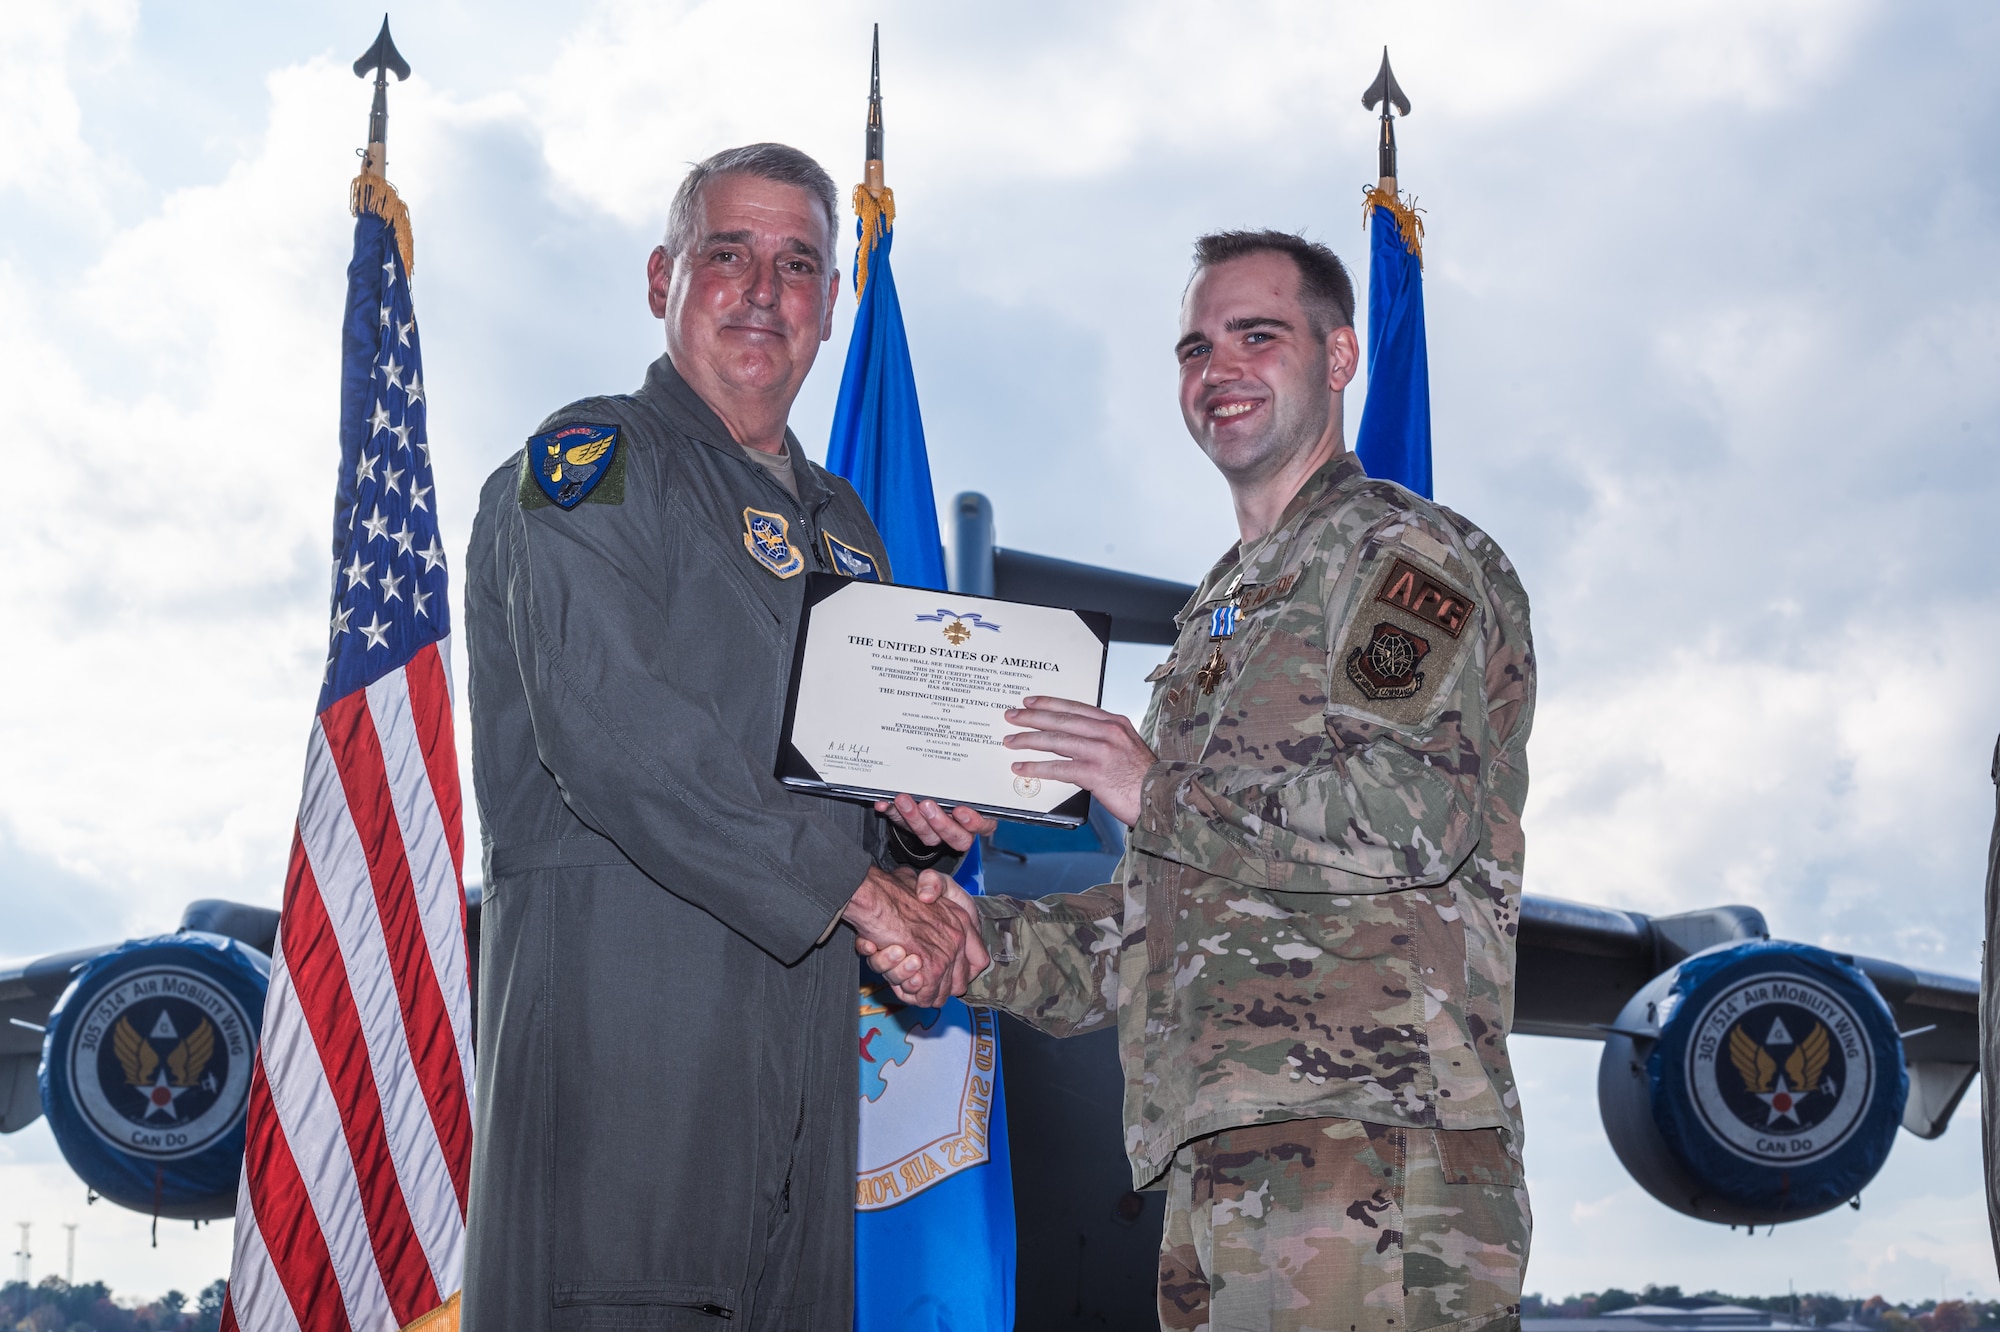 U.S. Air Force Senior Airman Richard Johnson, 305th Aircraft Maintenance Squadron flying crew chief, is awarded the distinguished flying cross with valor by Gen. Mike Minihan, Air Mobility Command commander, on Joint Base McGuire-Dix-Lakehurst, N.J., Nov. 1, 2022. The distinguished flying cross with valor is one of the highest awards for extraordinary achievement and is awarded for heroism while participating in aerial flight. (U.S. Air Force photo by Senior Airman Joseph Morales)